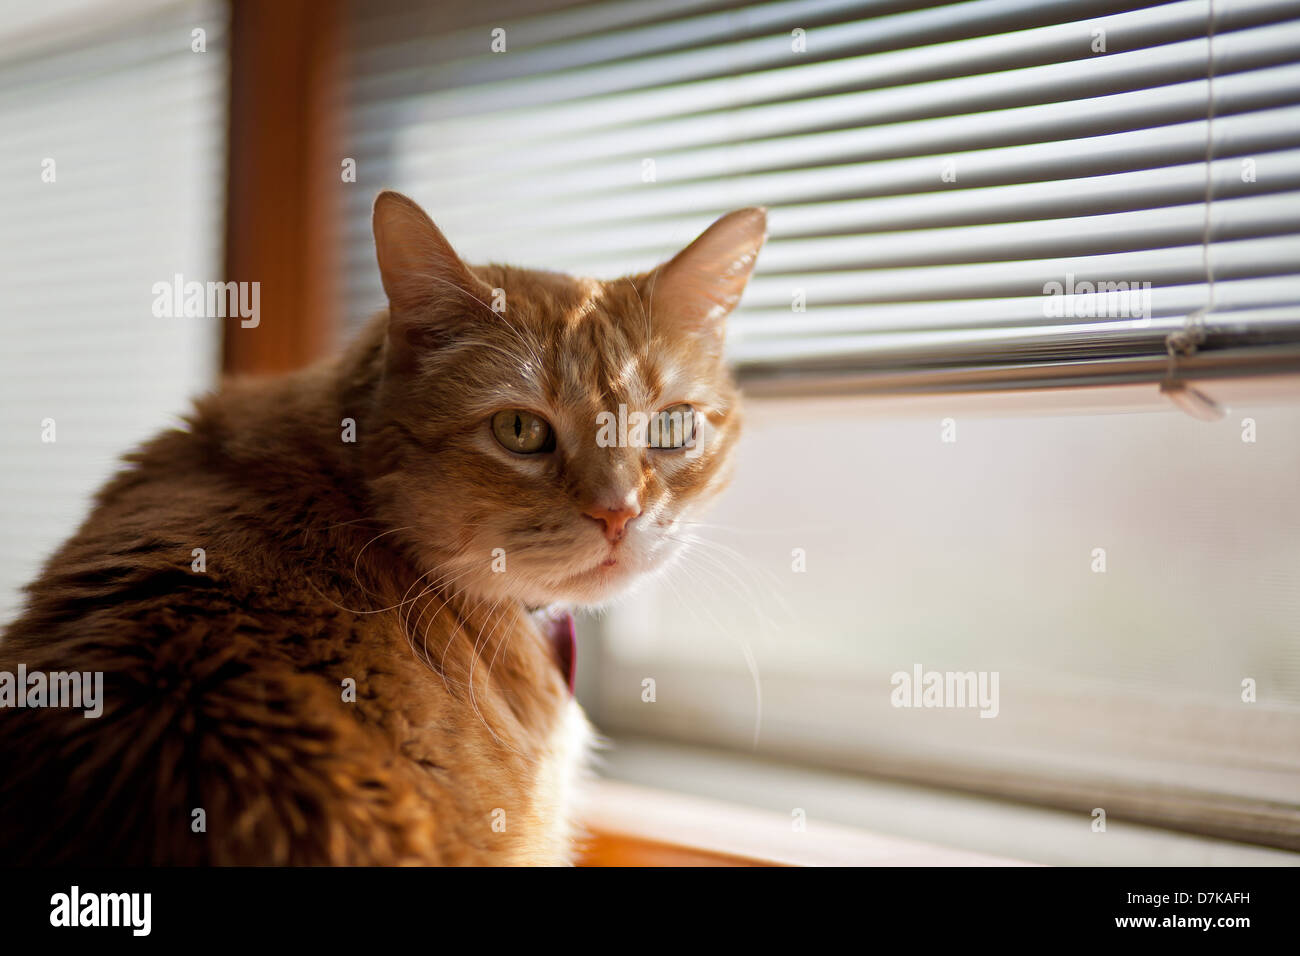 An Orange tabby cat sits in front of a window. Stock Photo